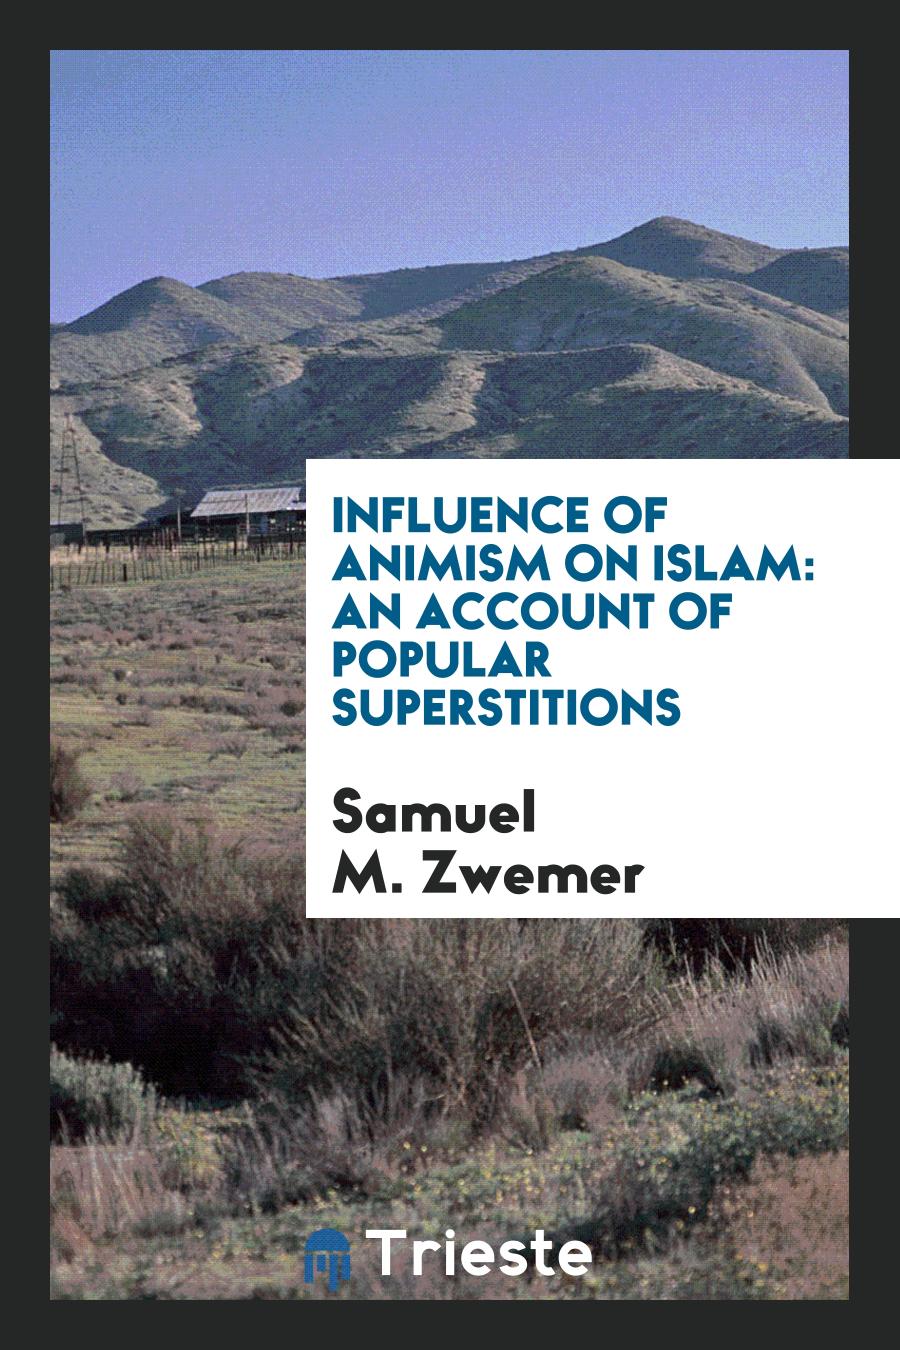 Influence of Animism on Islam: An Account of Popular Superstitions